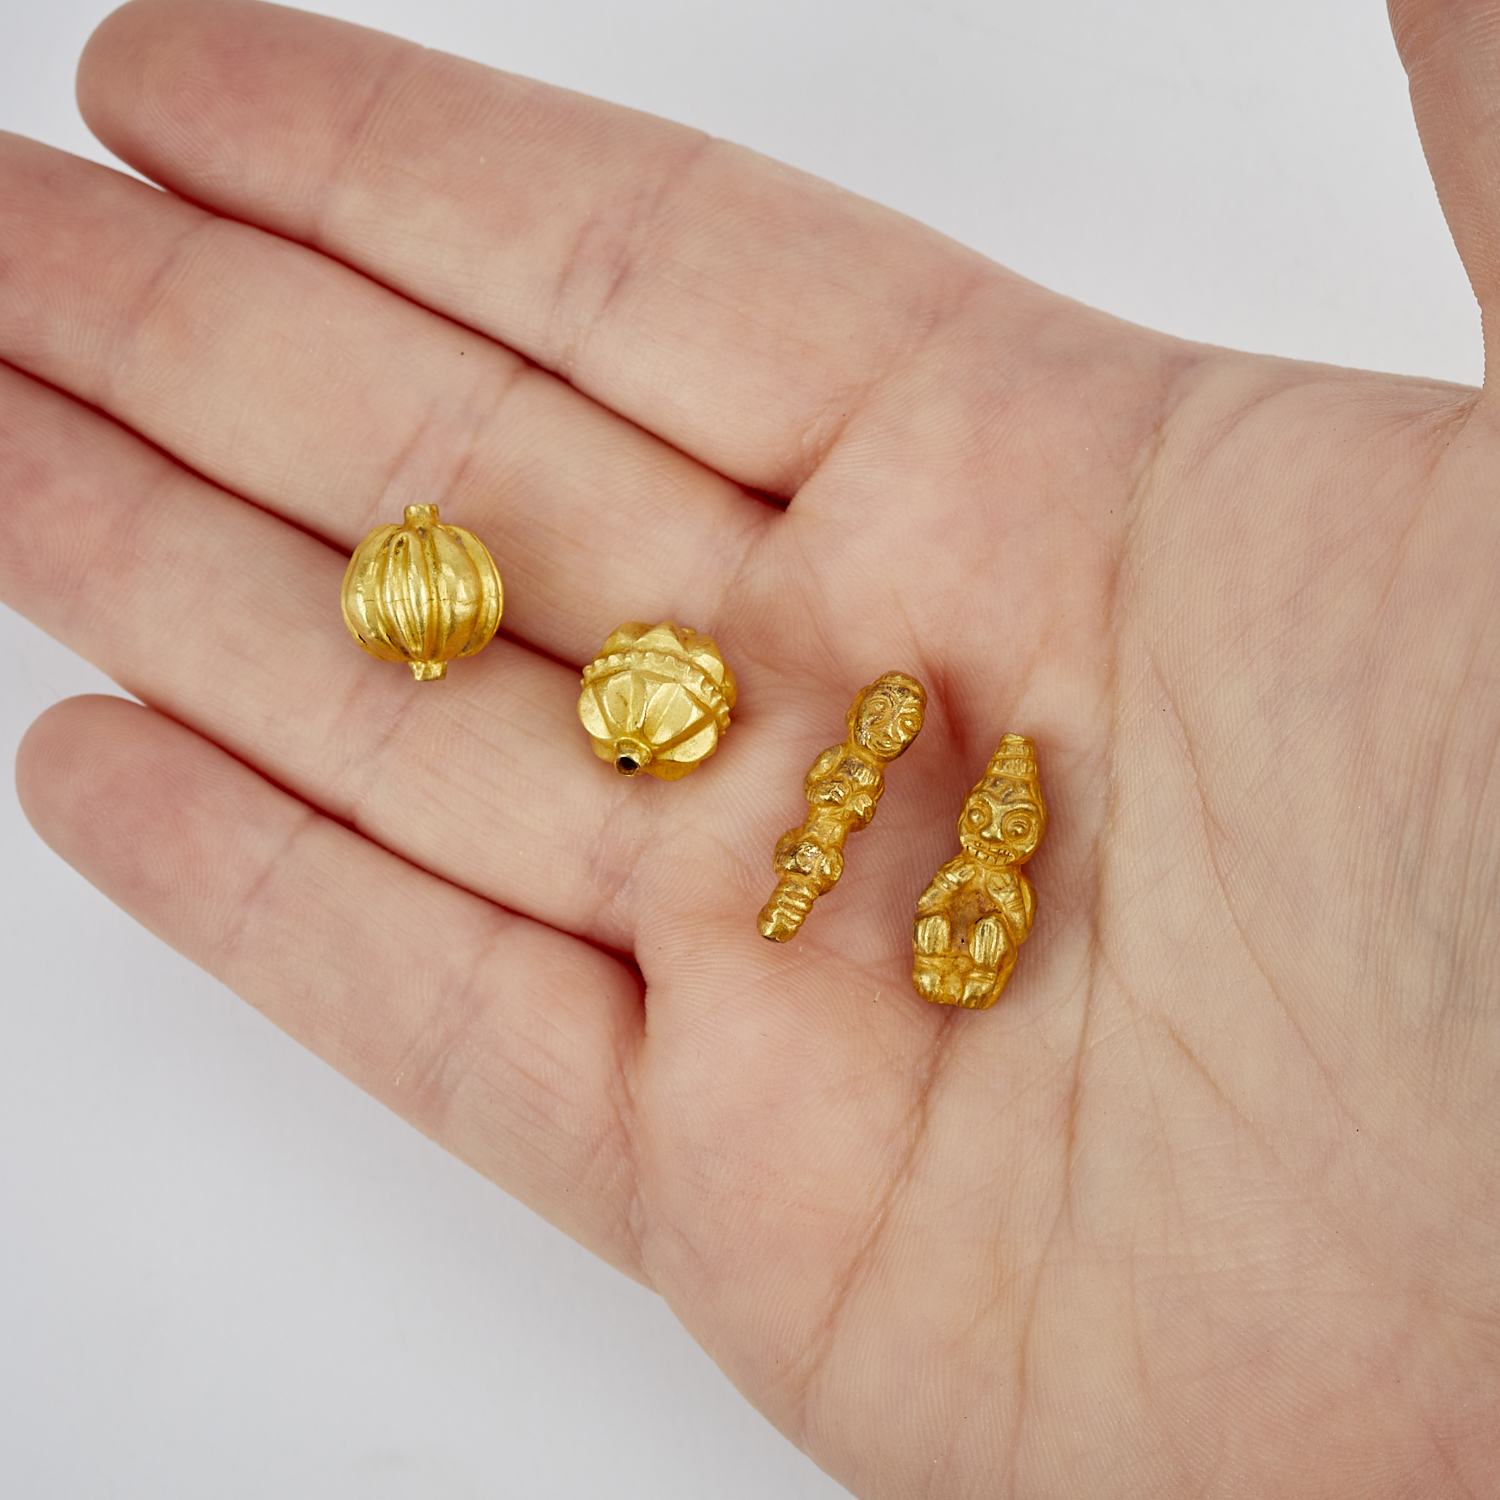 4 Southeast Asian Silk Road Gold Beads - Image 2 of 4